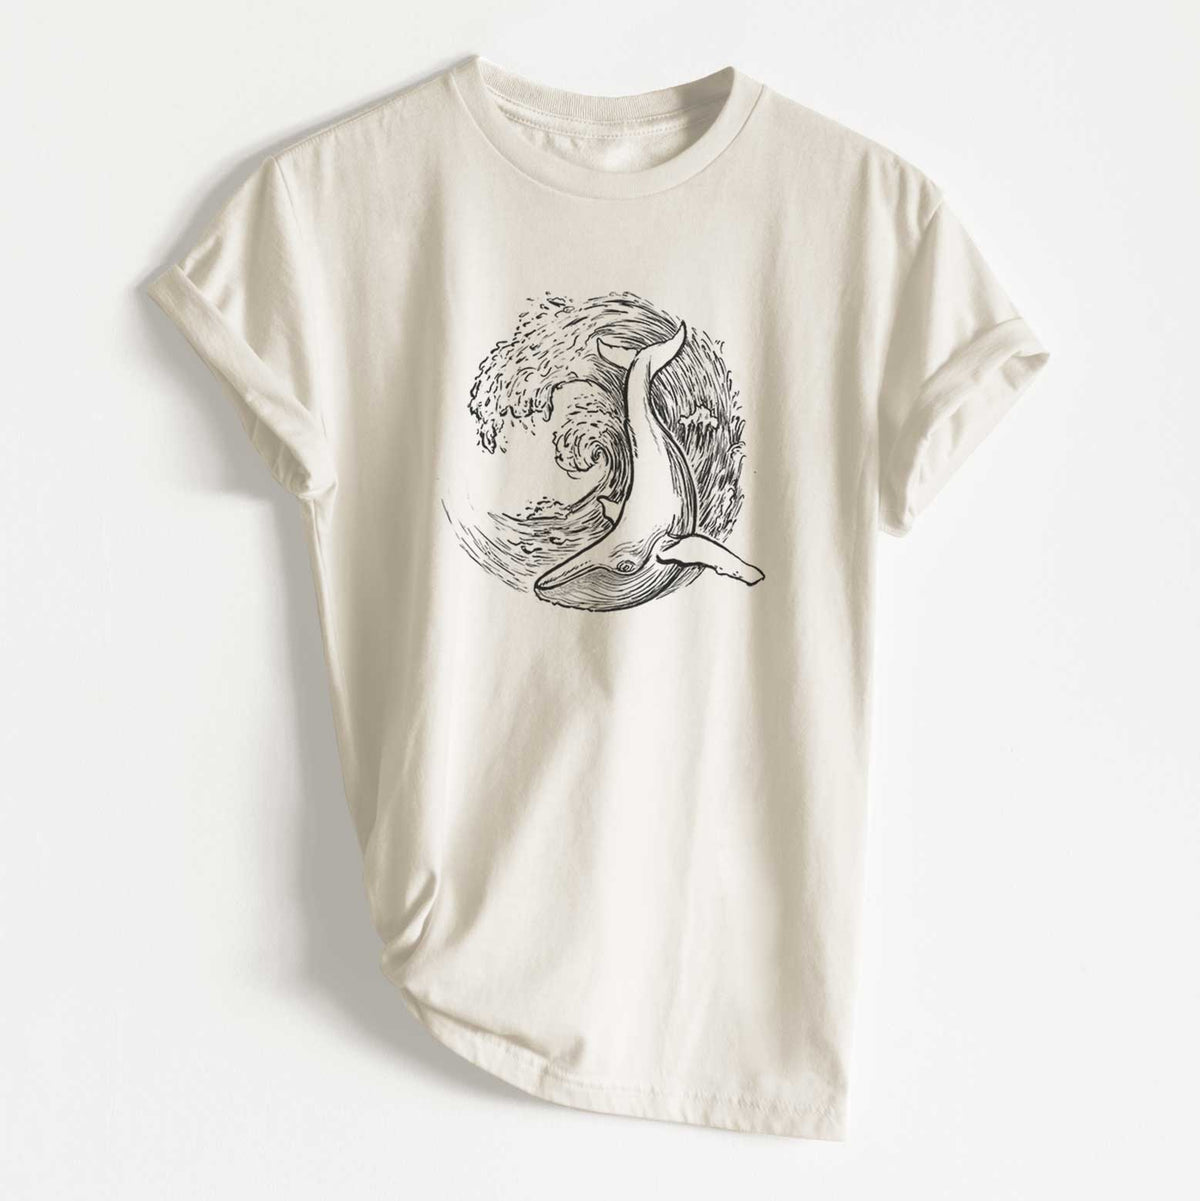 Whale Wave - Unisex Recycled Eco Tee  - CLOSEOUT - FINAL SALE